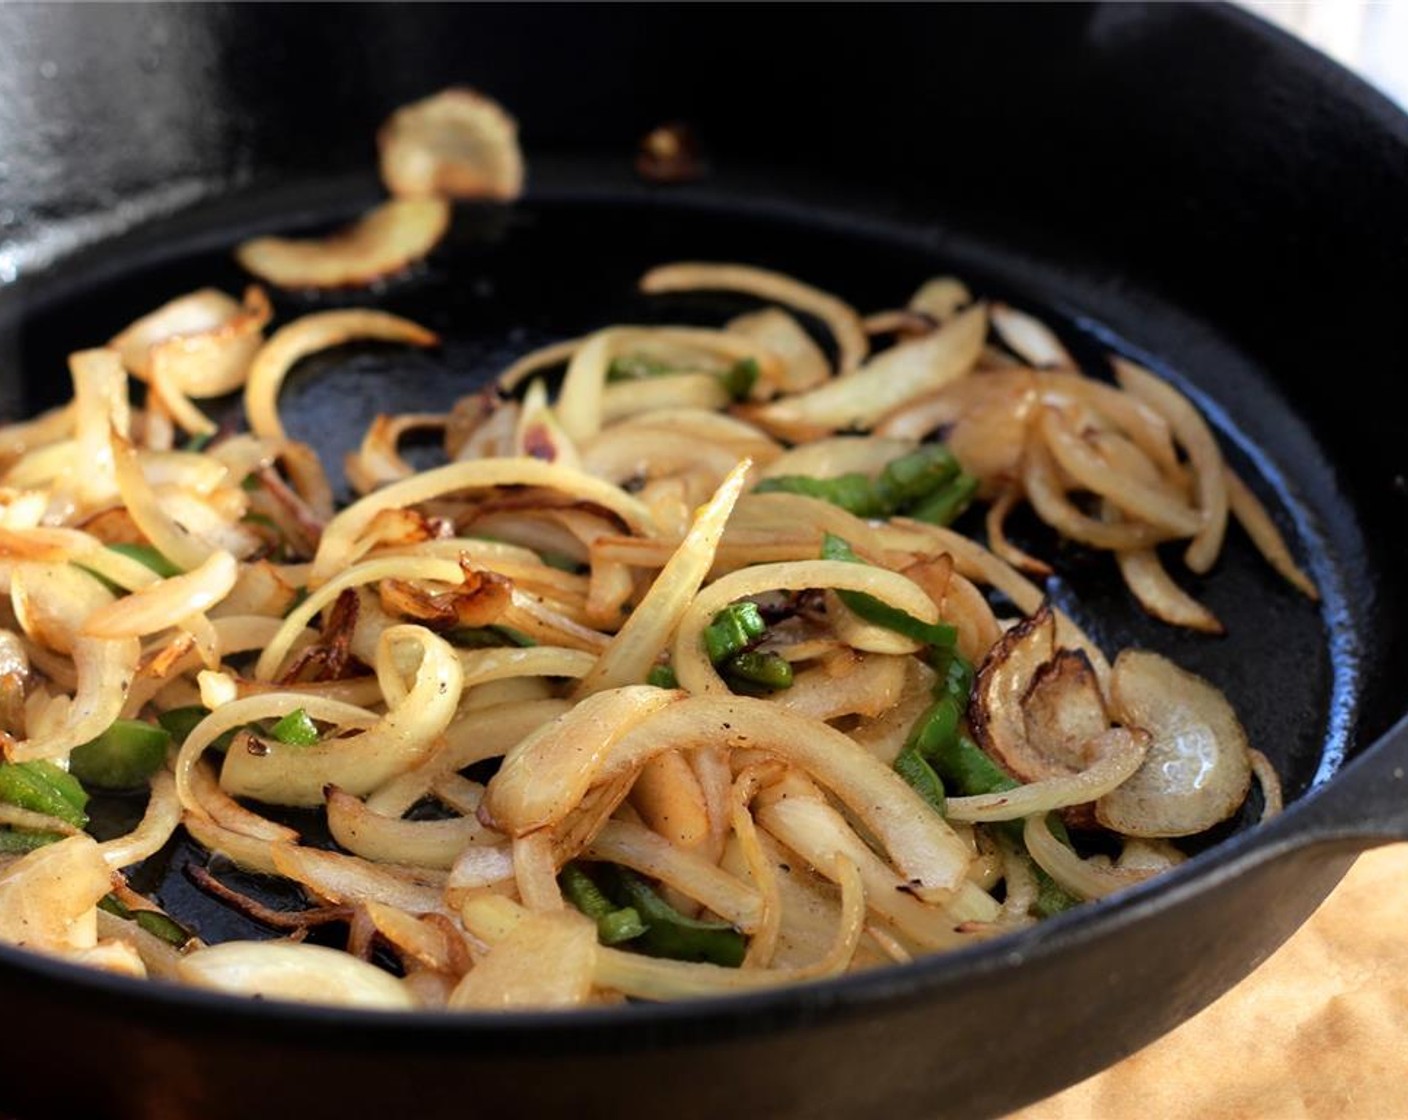 step 7 For the sauce, add Olive Oil (2 Tbsp) to the same skillet and cook the onions and jalapeno until golden.